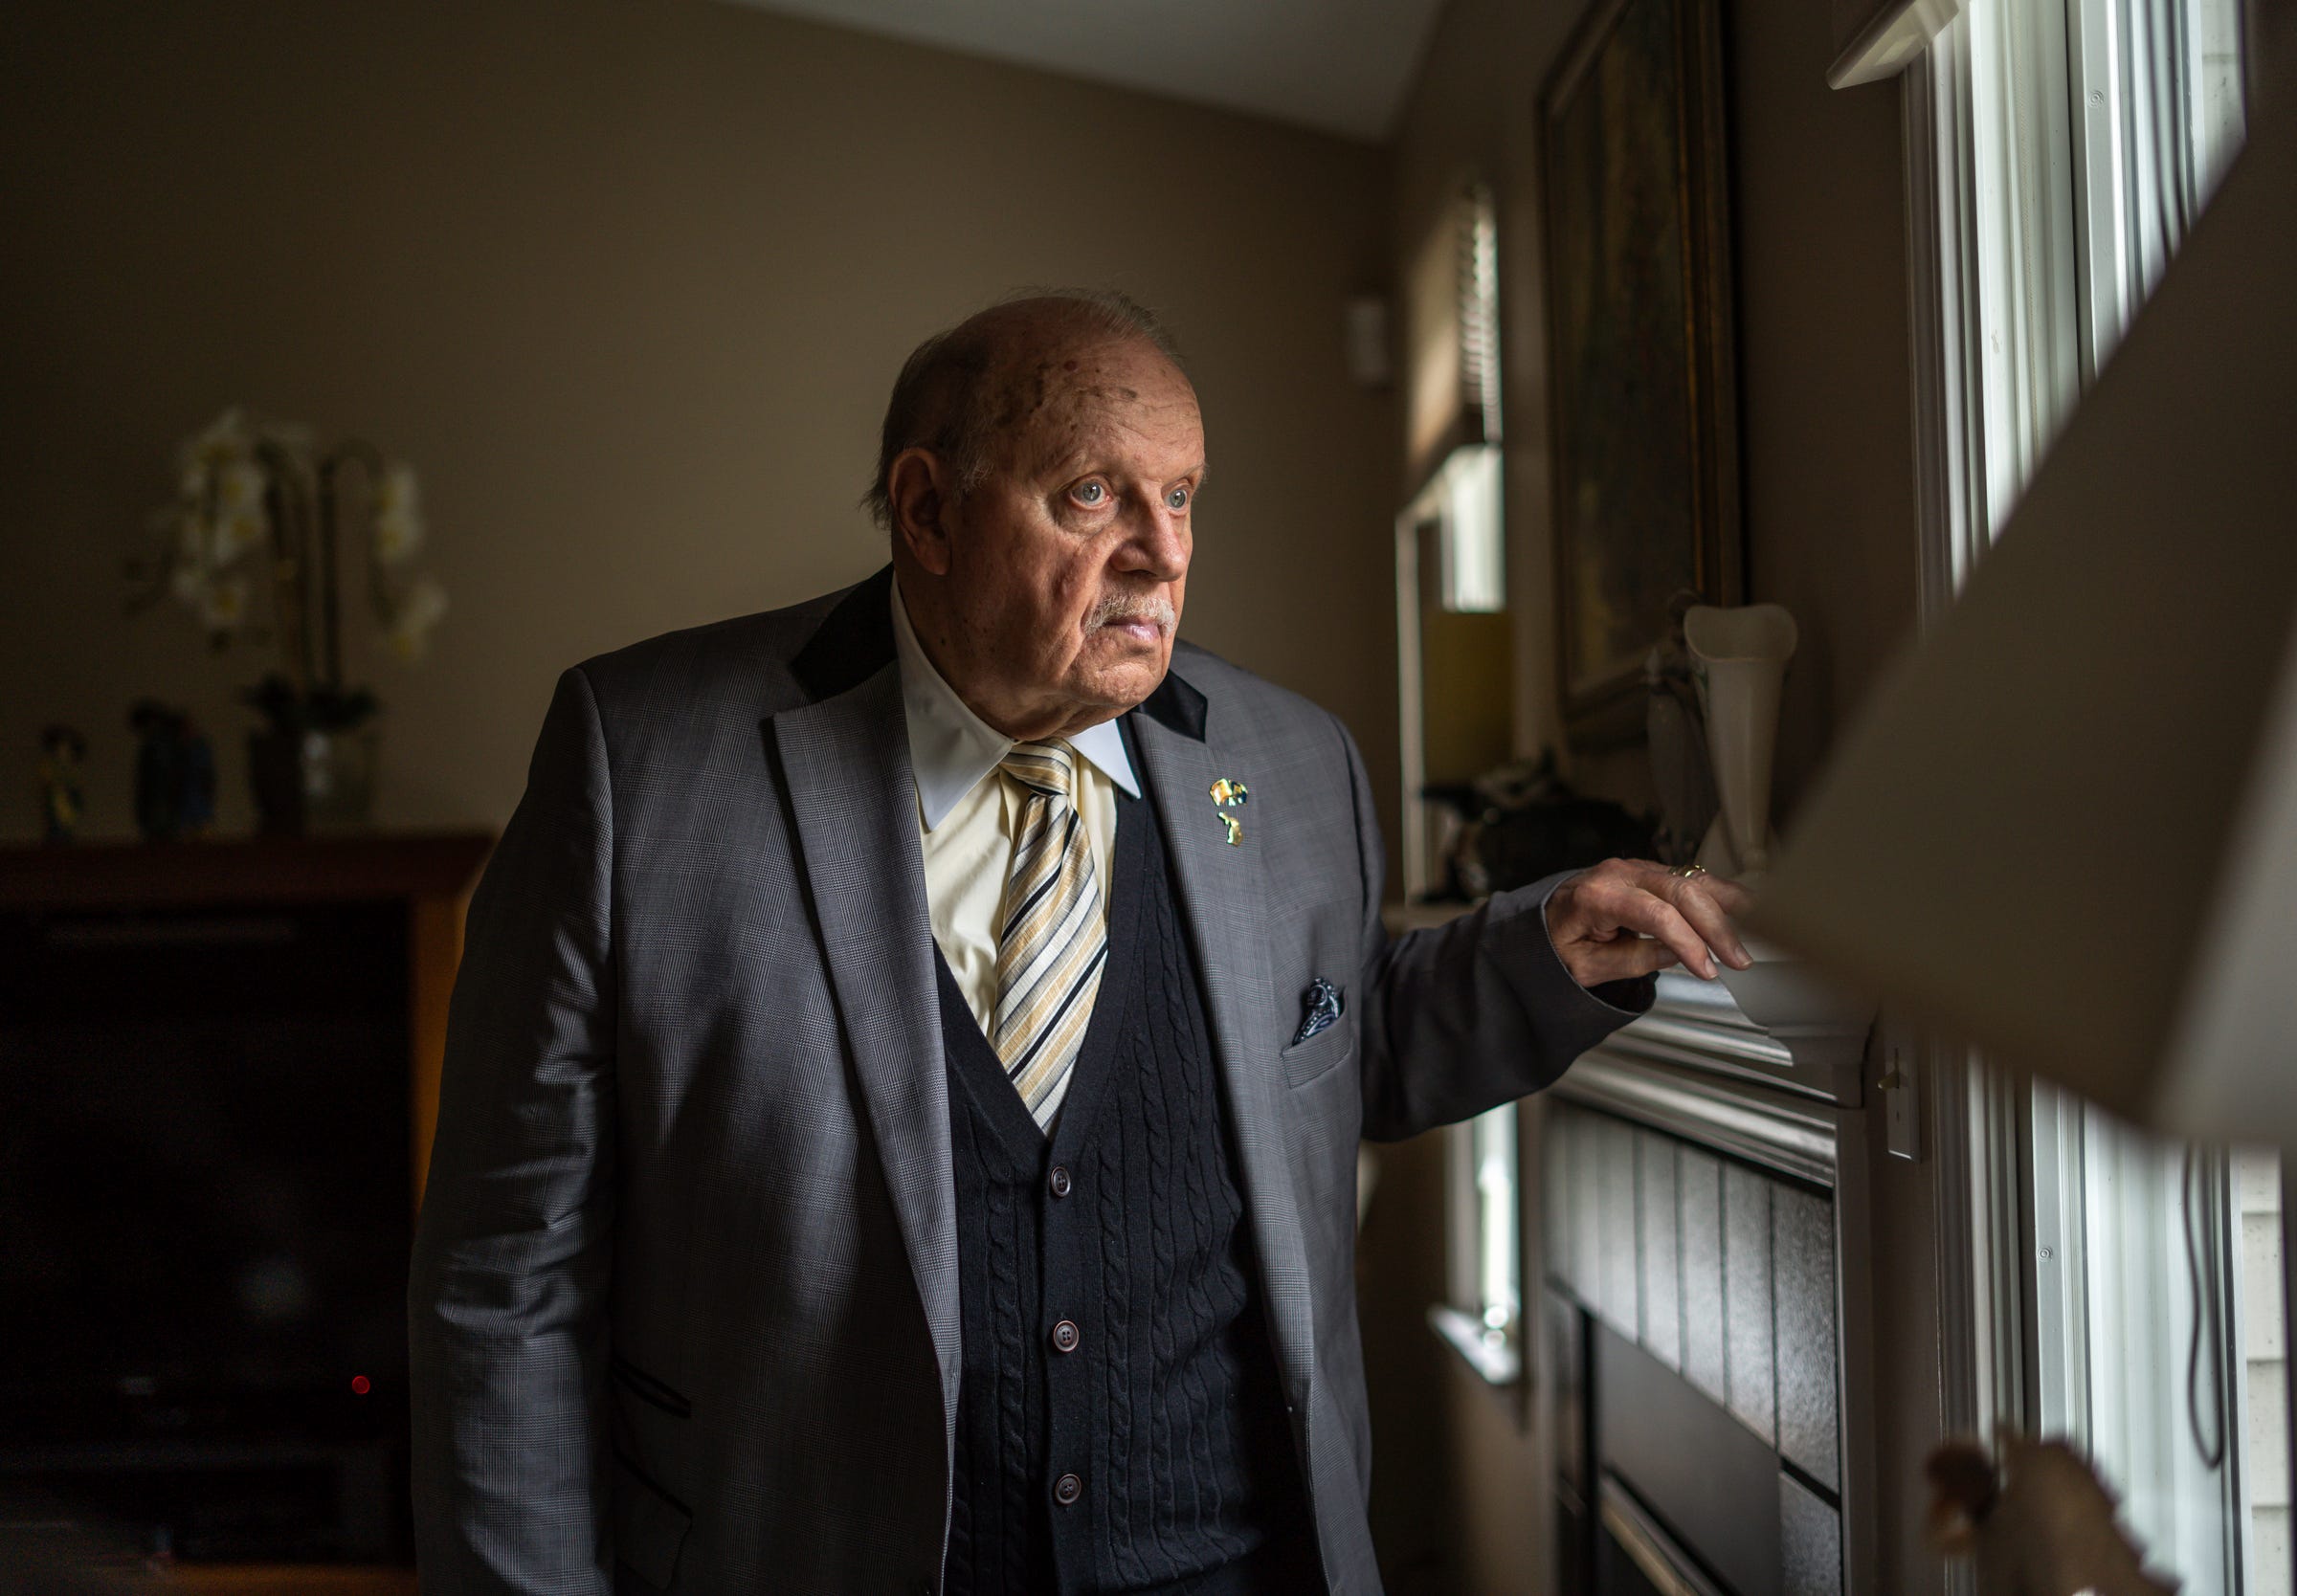 Paul Tarr, of Williamston, stands in his home on Friday, March 25, 2022. Tarr helped secure the rights of people with mental illness and developmental and intellectual disabilities in Michigan.